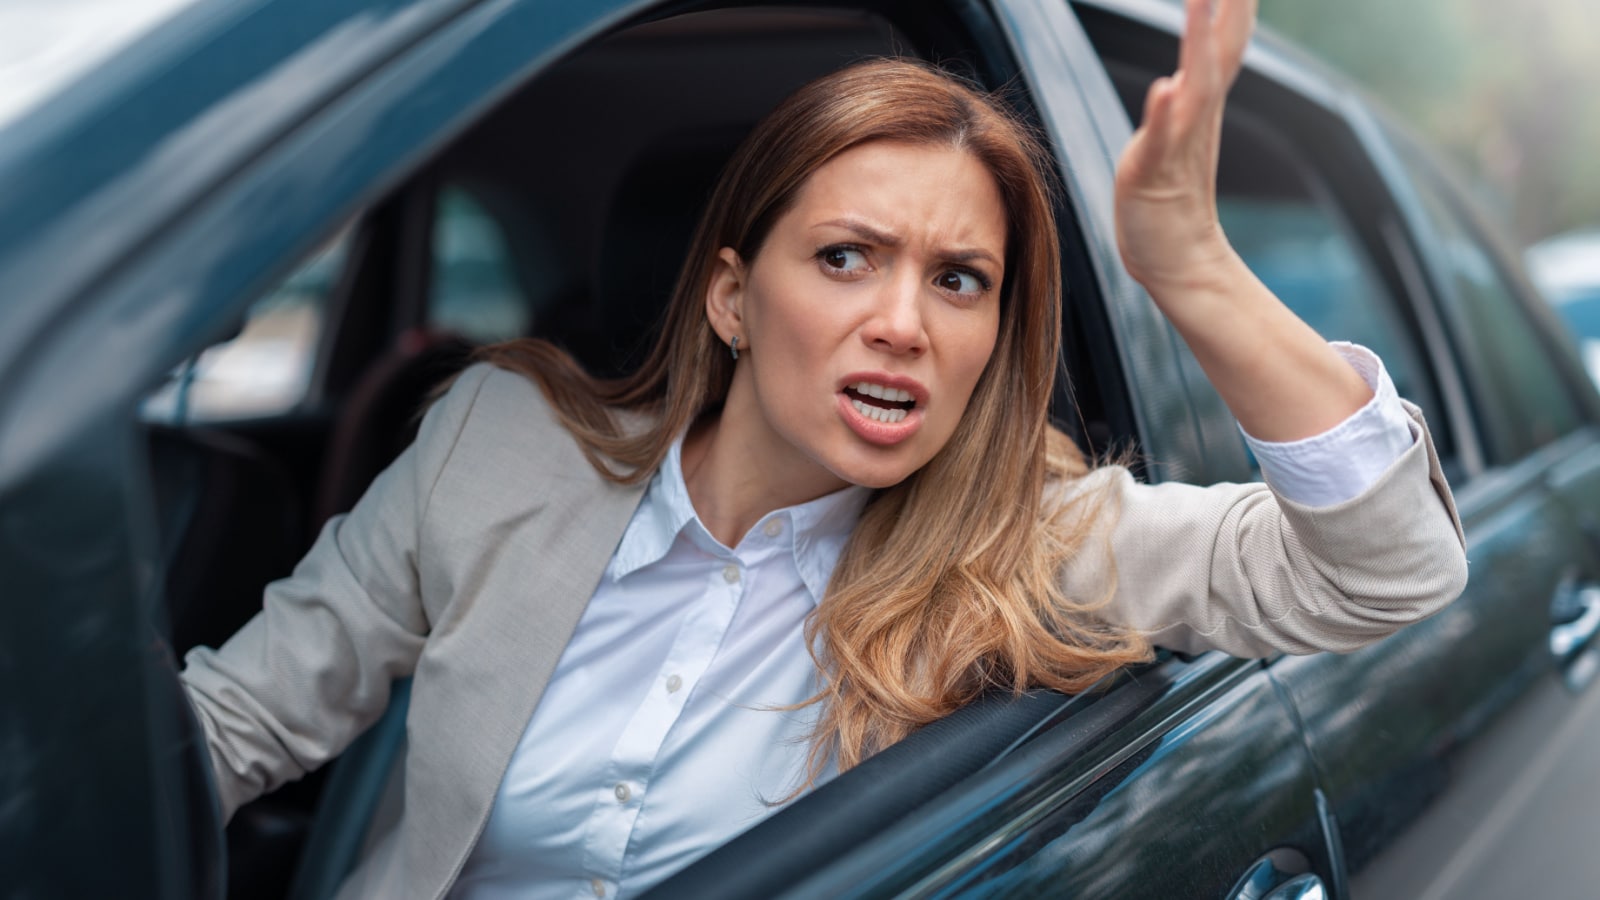 Road rage traffic jam concept. Woman is driving her car very aggressive